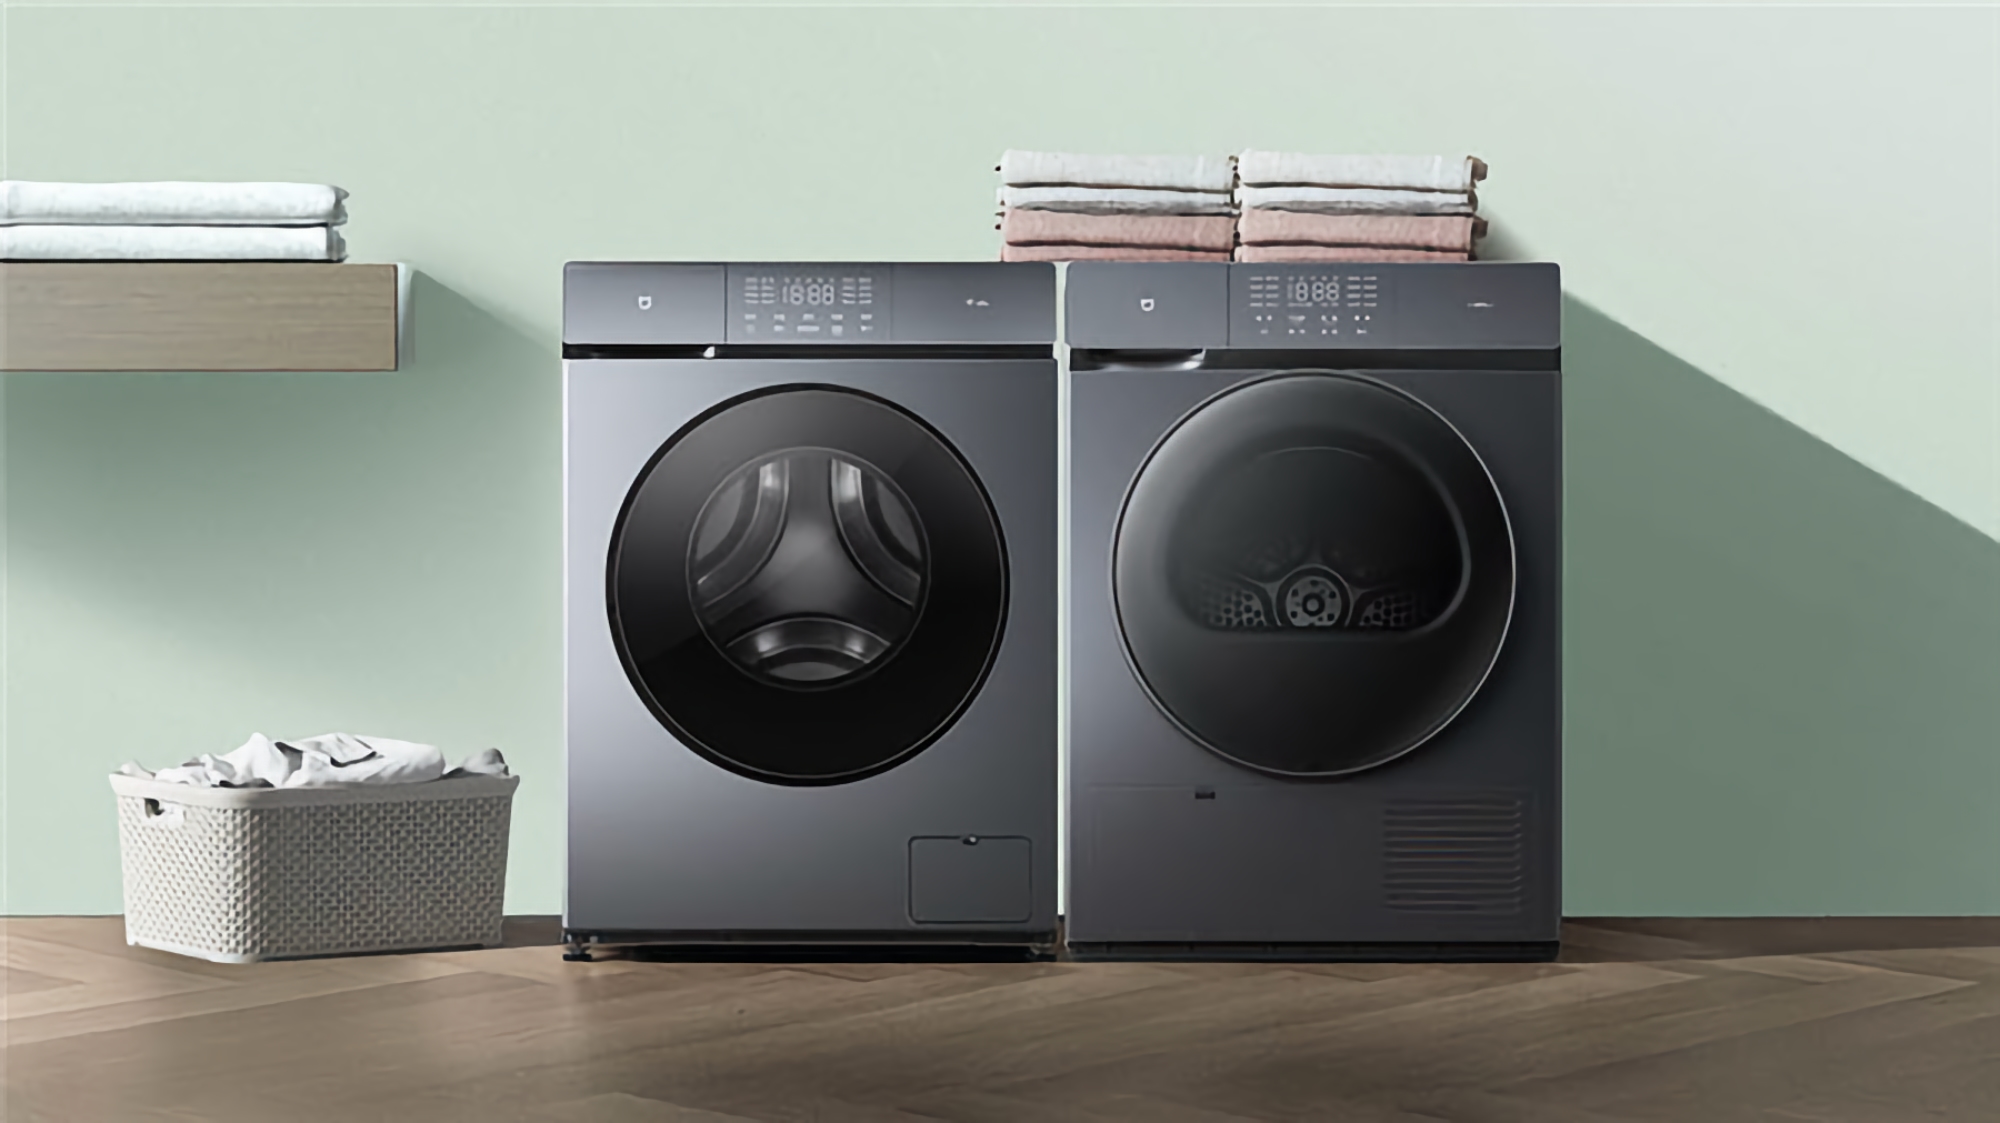 Xiaomi introduced under the brand MiJia washer and dryer with the function of sterilizing clothes for $716